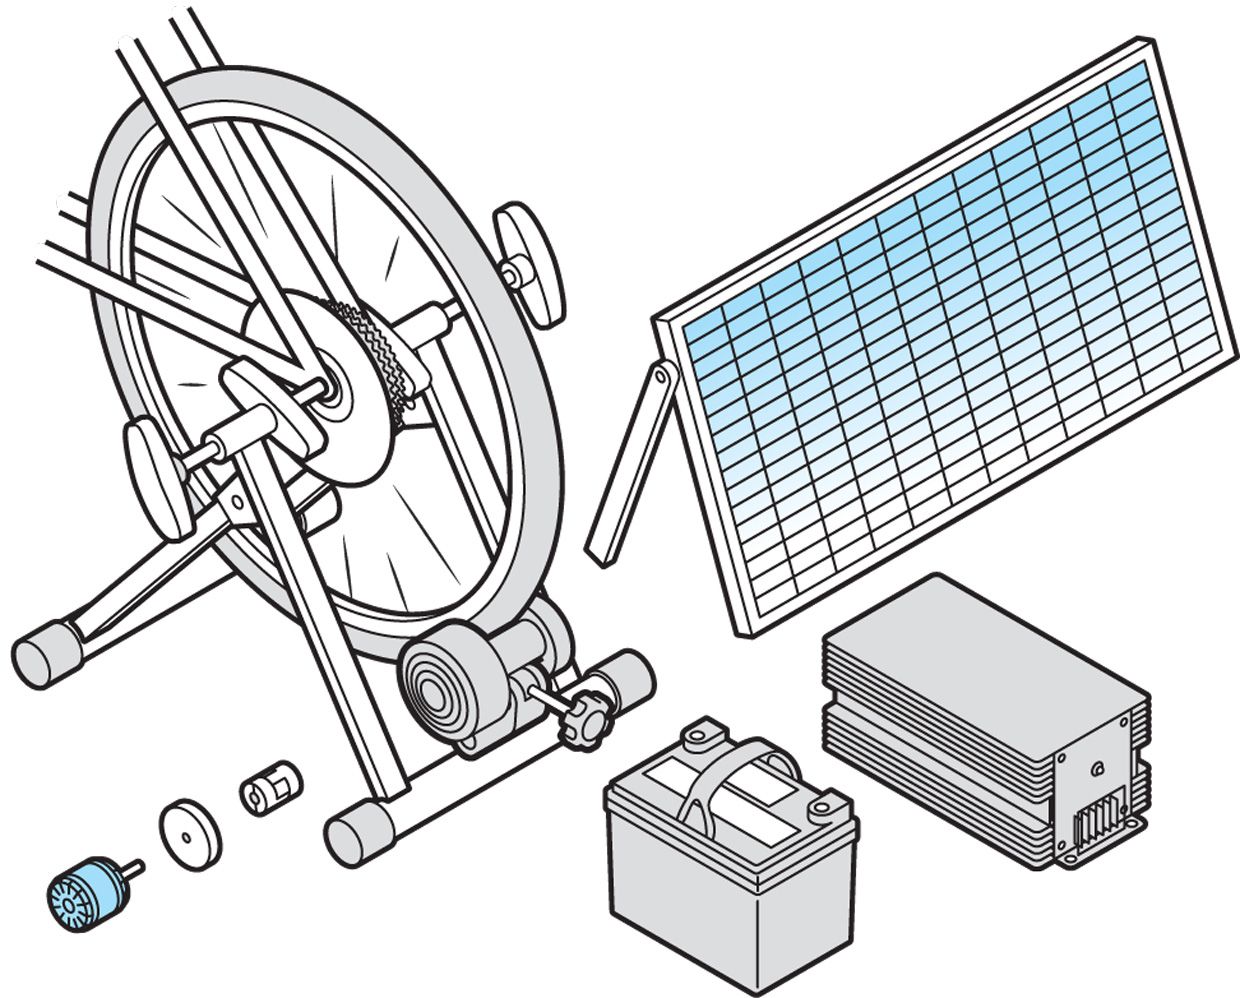 Illustration of the components of the bike battery.